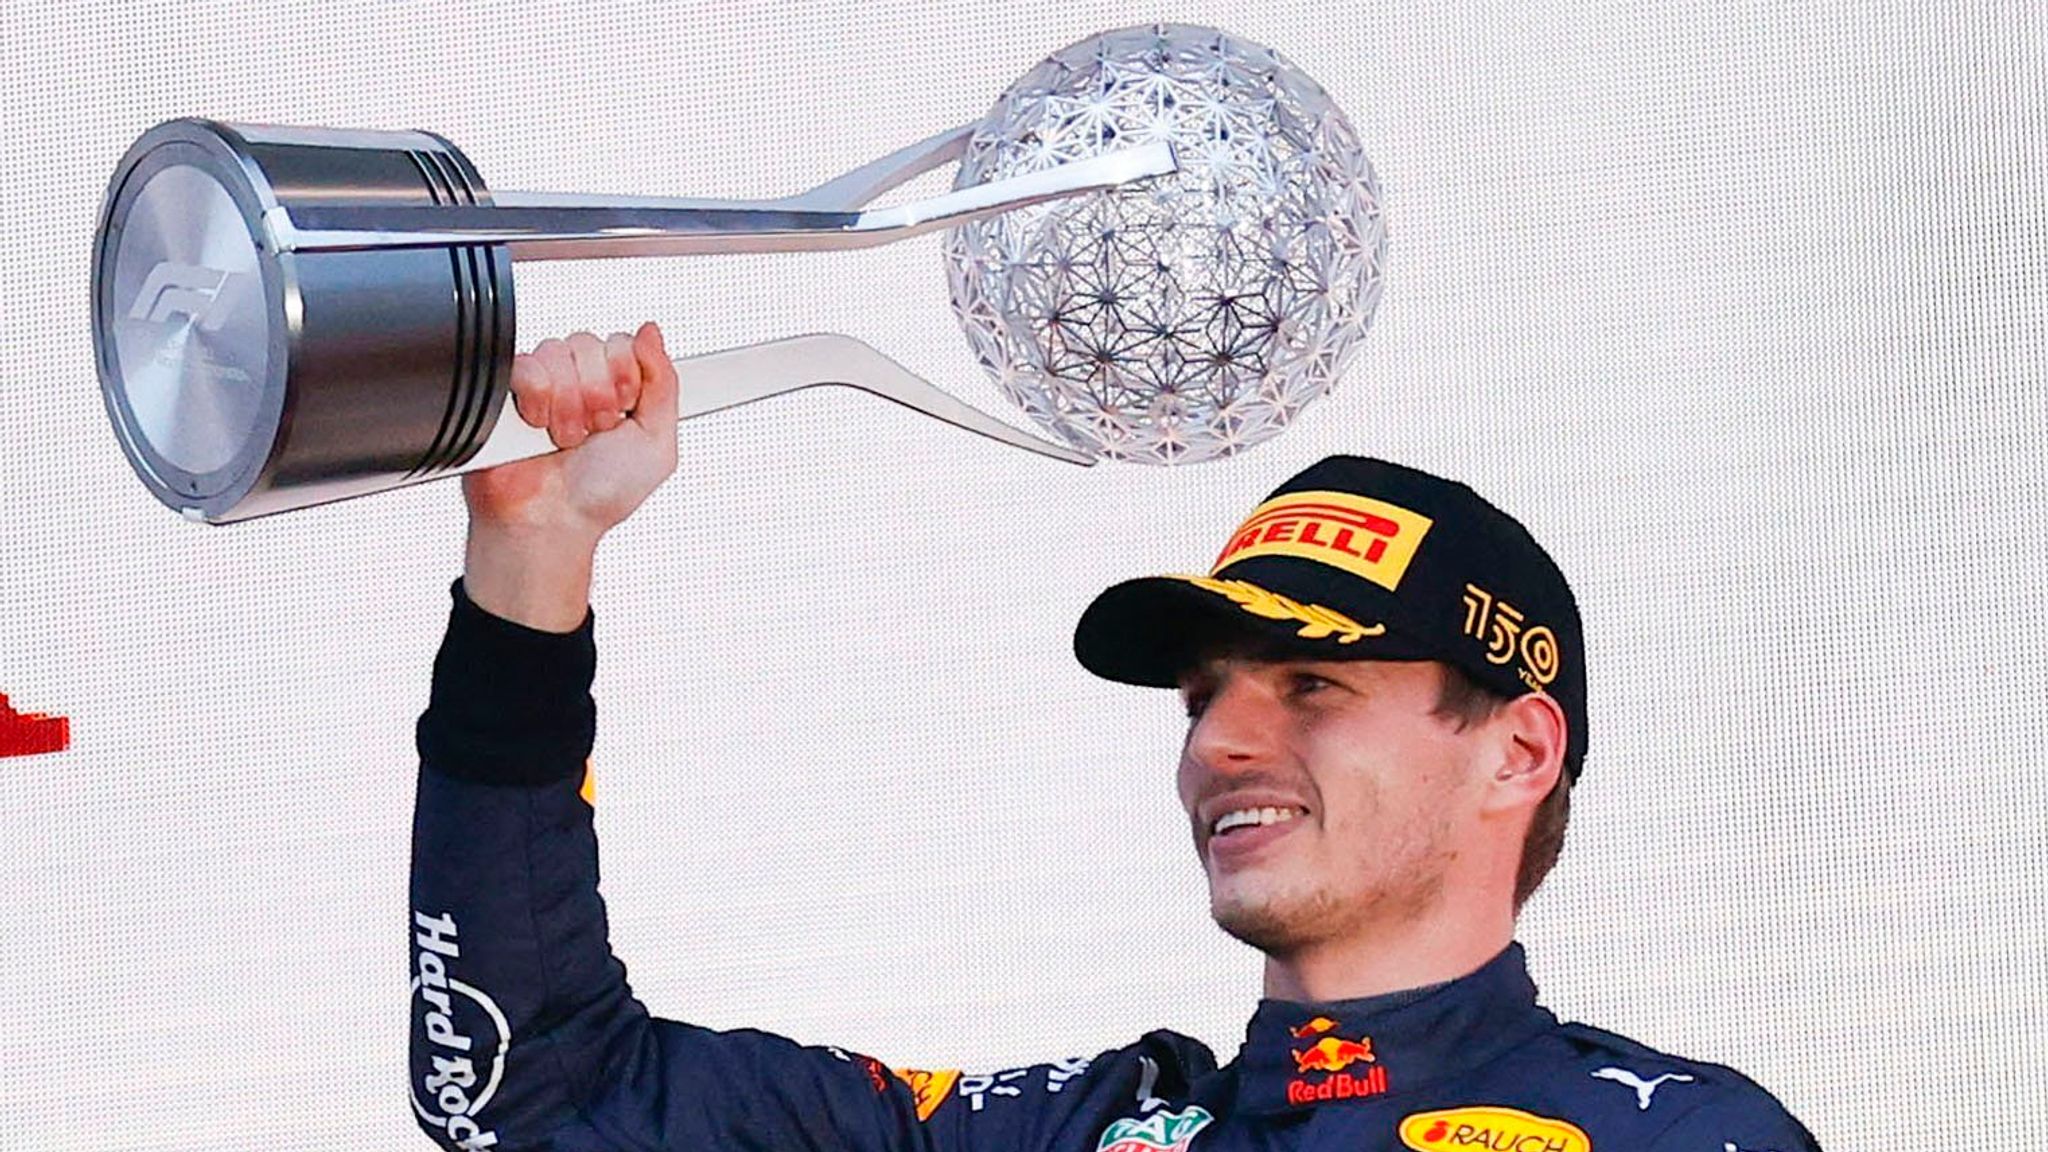 Max Verstappen crowned F1 champion after winning chaotic Japanese Grand